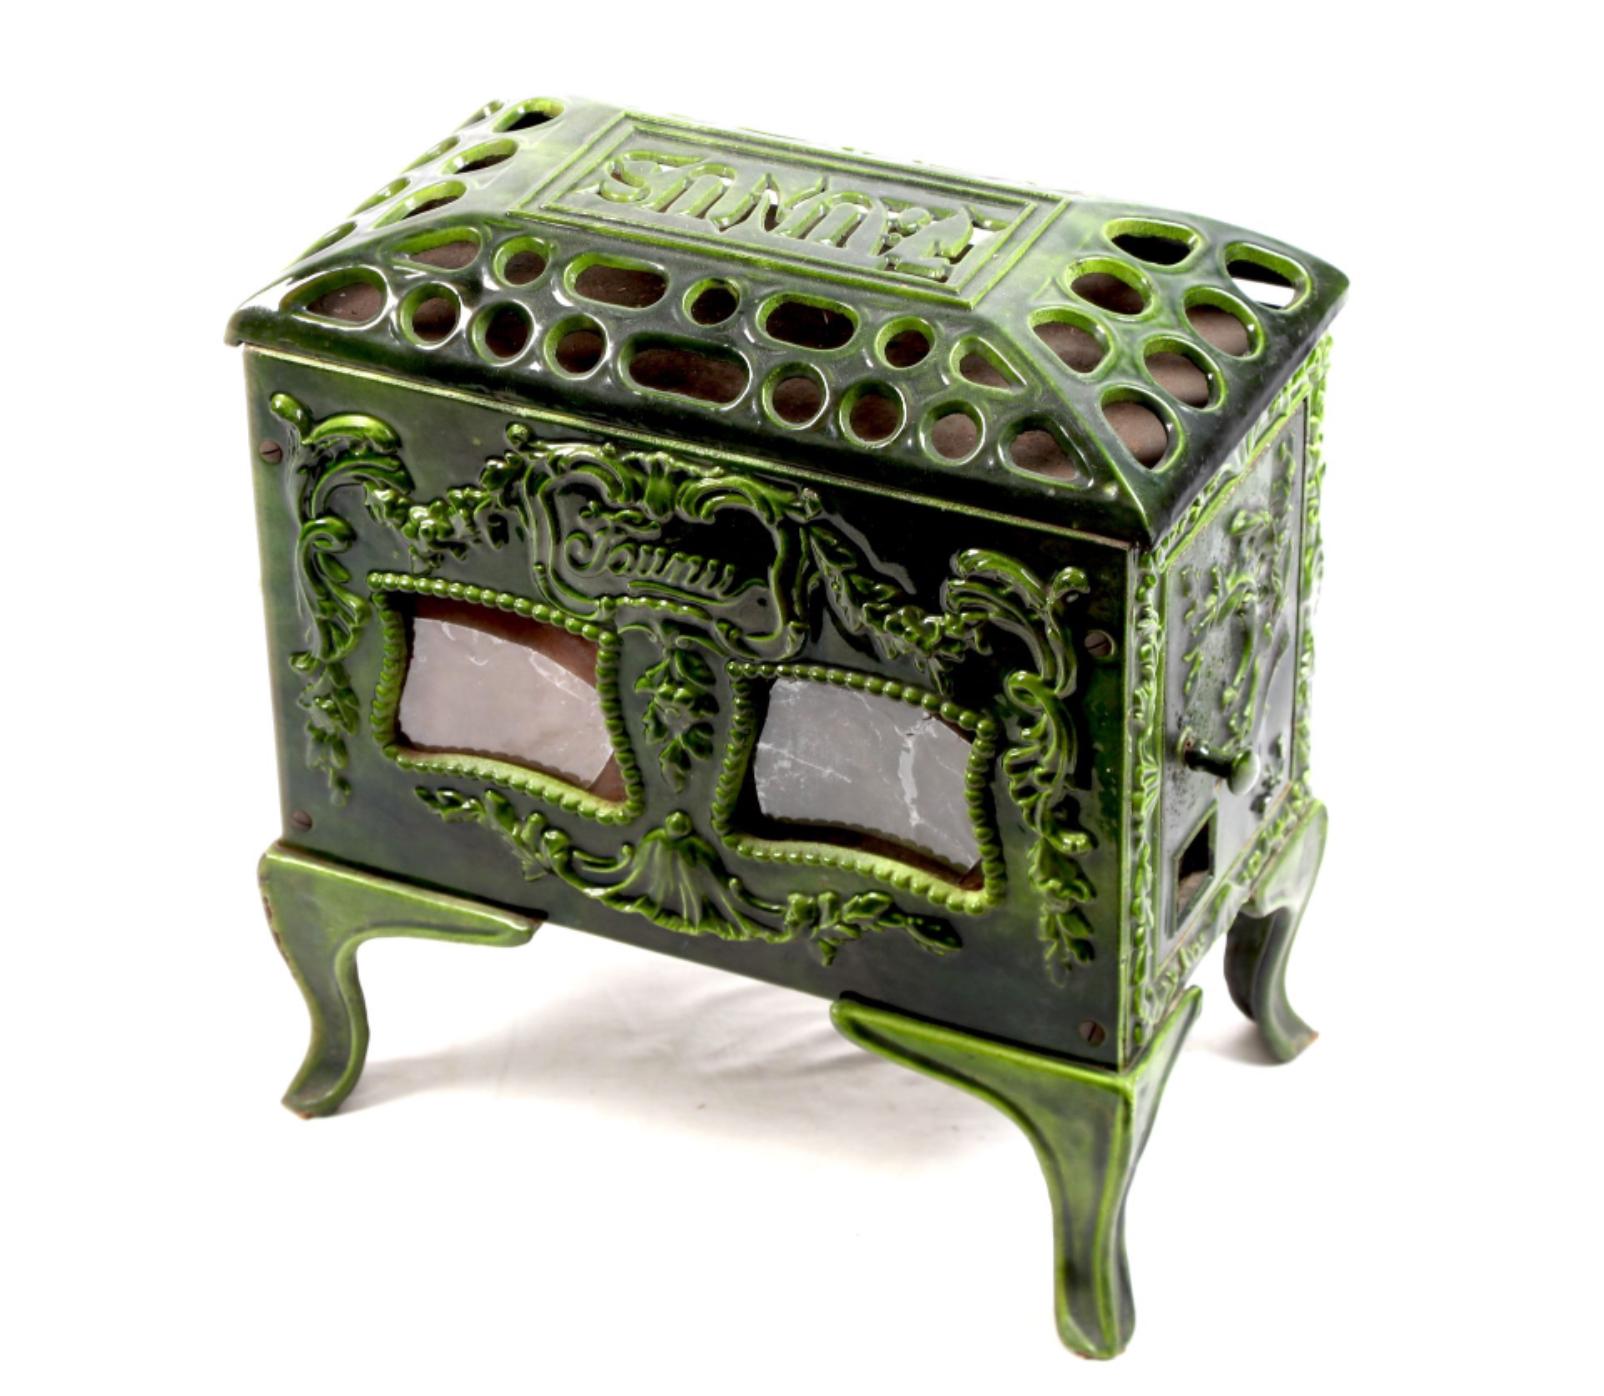 Beautiful green ceramic stove FAUNUS made in France, circa 1920. The wood to be loaded from small side door and fire to be seen from two small front windows. The piece is richly decorated with floral elements and ribbons.
France, circa 1920.